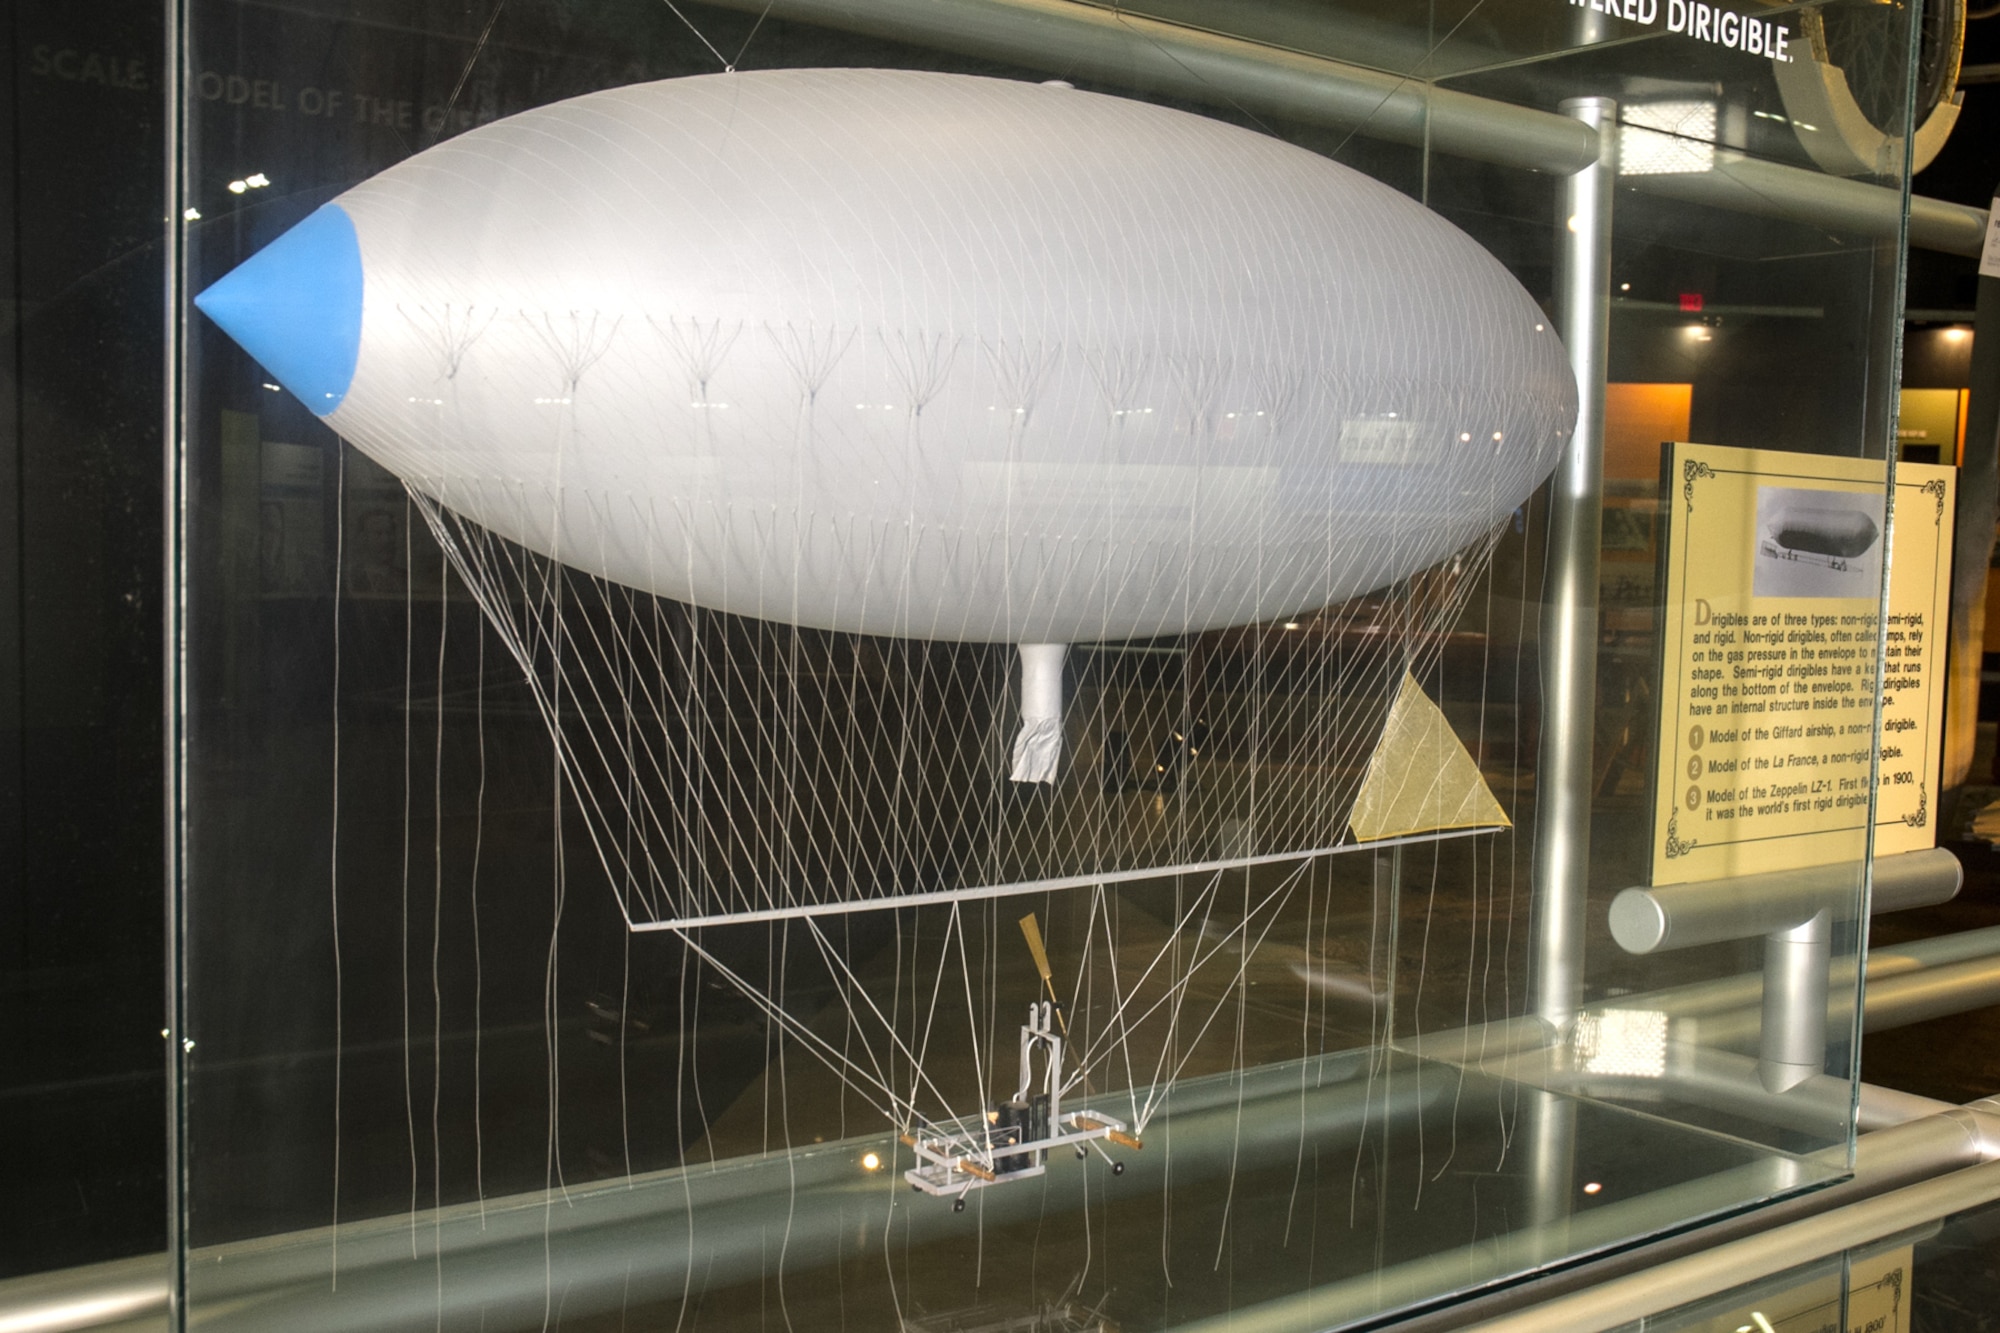 Dirigibles are of three types: non-rigid, semi-rigid and rigid. Non-rigid dirigibles, often called blimps, rely on the gas pressure in the envelope to maintain their shape. Semi-rigid dirigibles have a keel that runs along the bottom of the envelope. Rigid dirigibles have an internal structure inside the envelope. This exhibit in the Early Years Gallery at the National Museum of the United States Air Force shows models of the Giffard airship (non-rigid dirigible), the "La France" (semi-rigid dirigible), and the "Zeppelin LZ-1" (world's first rigid dirigible, first flown in 1900). (U.S. Air Force photo)